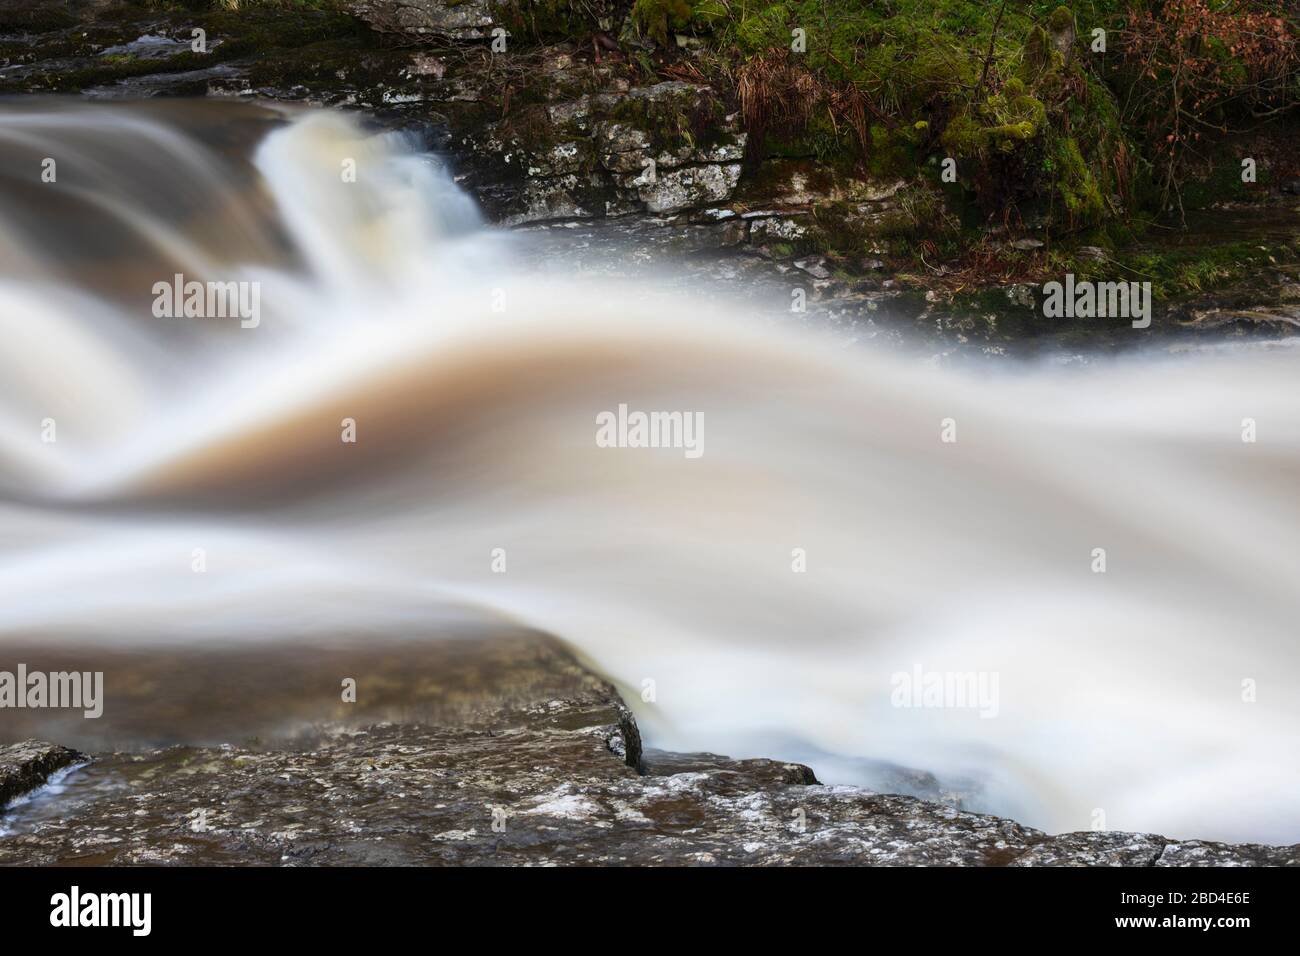 Cascata Stainforth Force nel Parco Nazionale Yorkshire Dales. Foto Stock